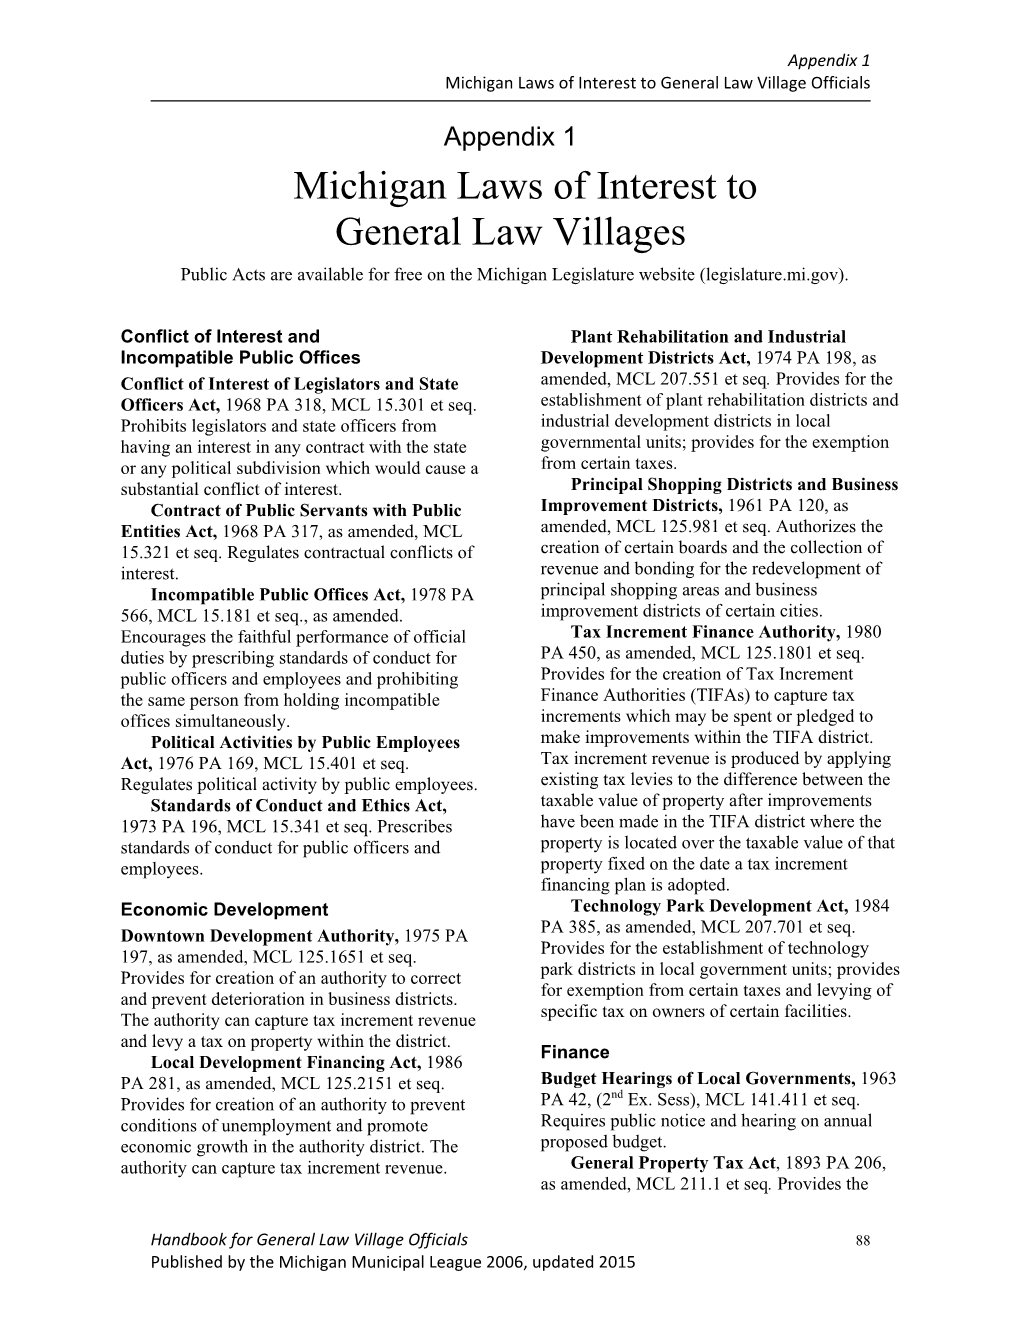 Michigan Laws of Interest to General Law Villages Public Acts Are Available for Free on the Michigan Legislature Website (Legislature.Mi.Gov)